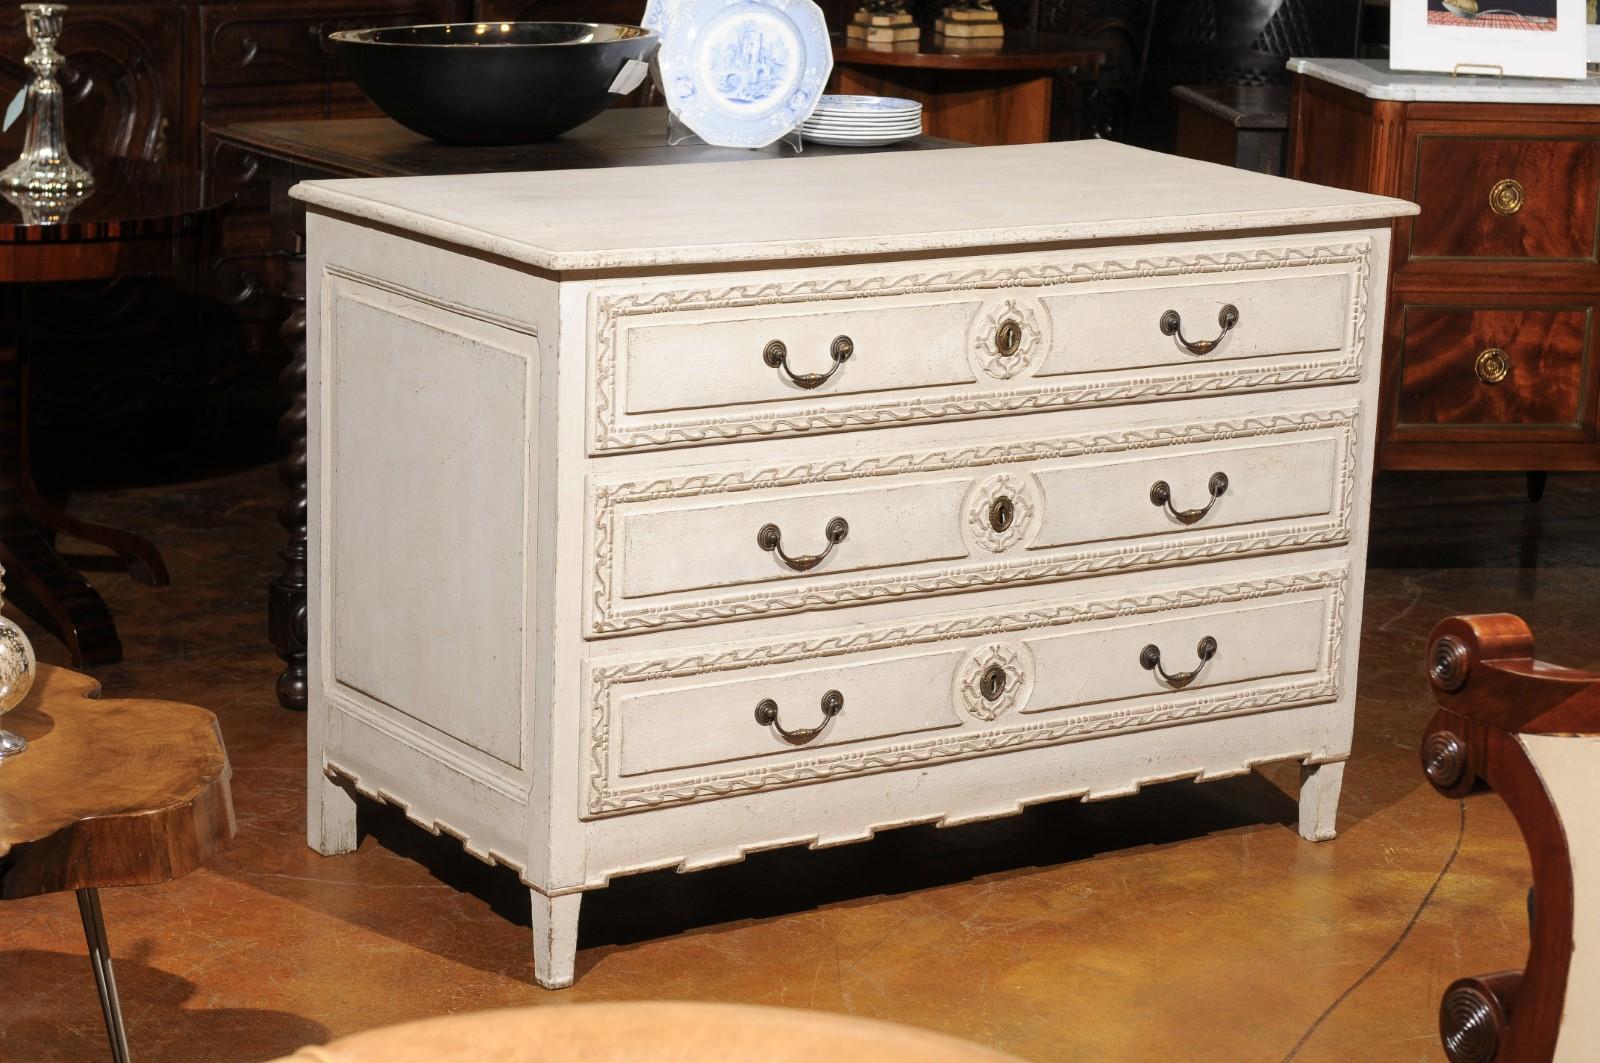 A Belgian Directoire style painted three-drawer commode from the mid-19th century, with carved drawers and elongated dentil molding. Born in Belgium during the 1850s, this painted commode features a rectangular top with beveled edges, sitting above